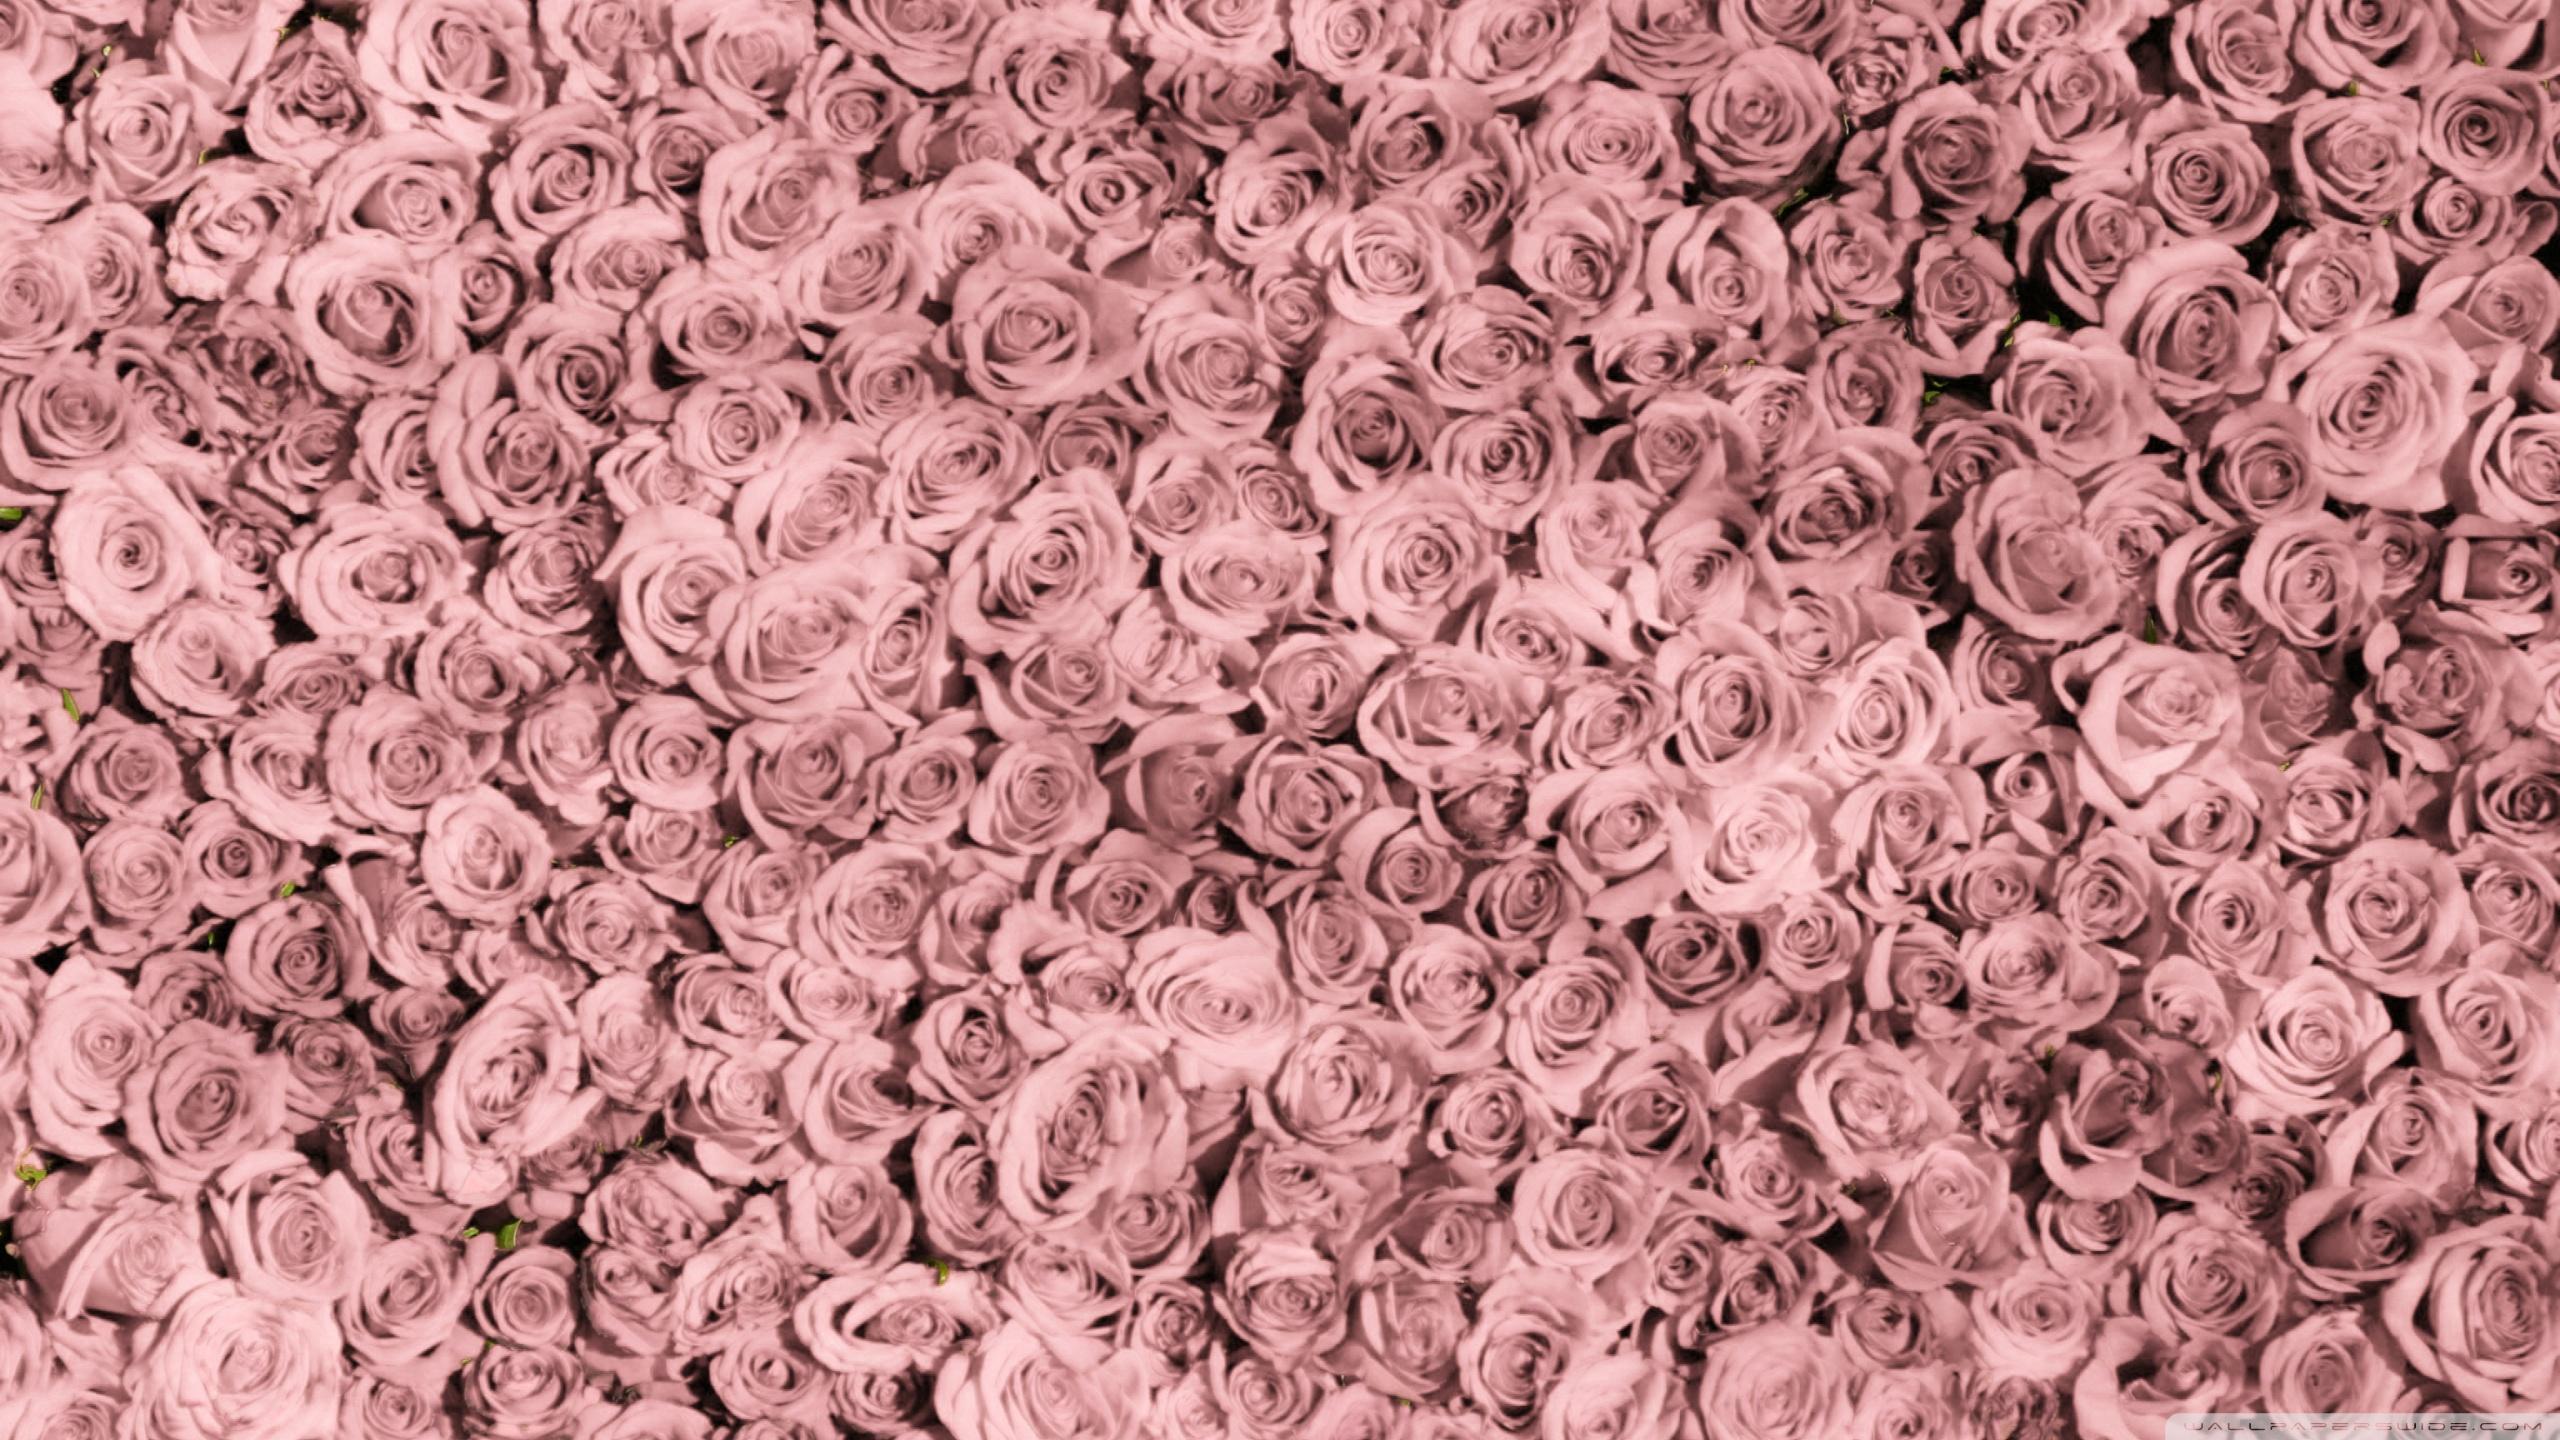 Rose Gold Aesthetic 2560x1440 Wallpapers On Wallpaperdog Find & download free graphic resources for rose gold background. rose gold aesthetic 2560x1440